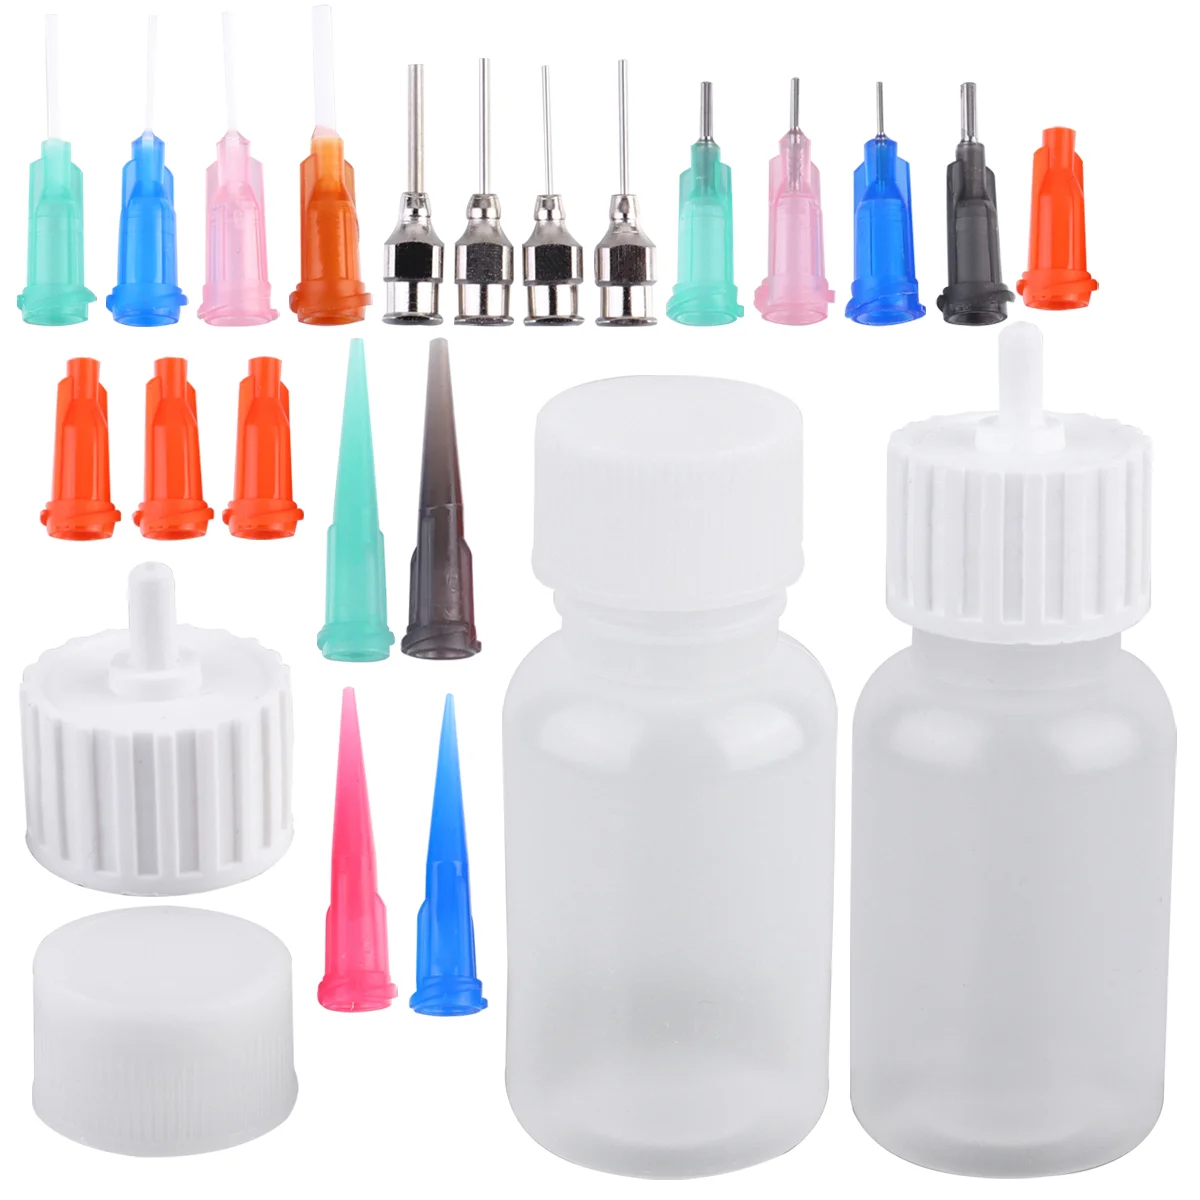 

24 Pcs Accessories Bottles Nail Sets Applicator Tool Needles Mouth Precision